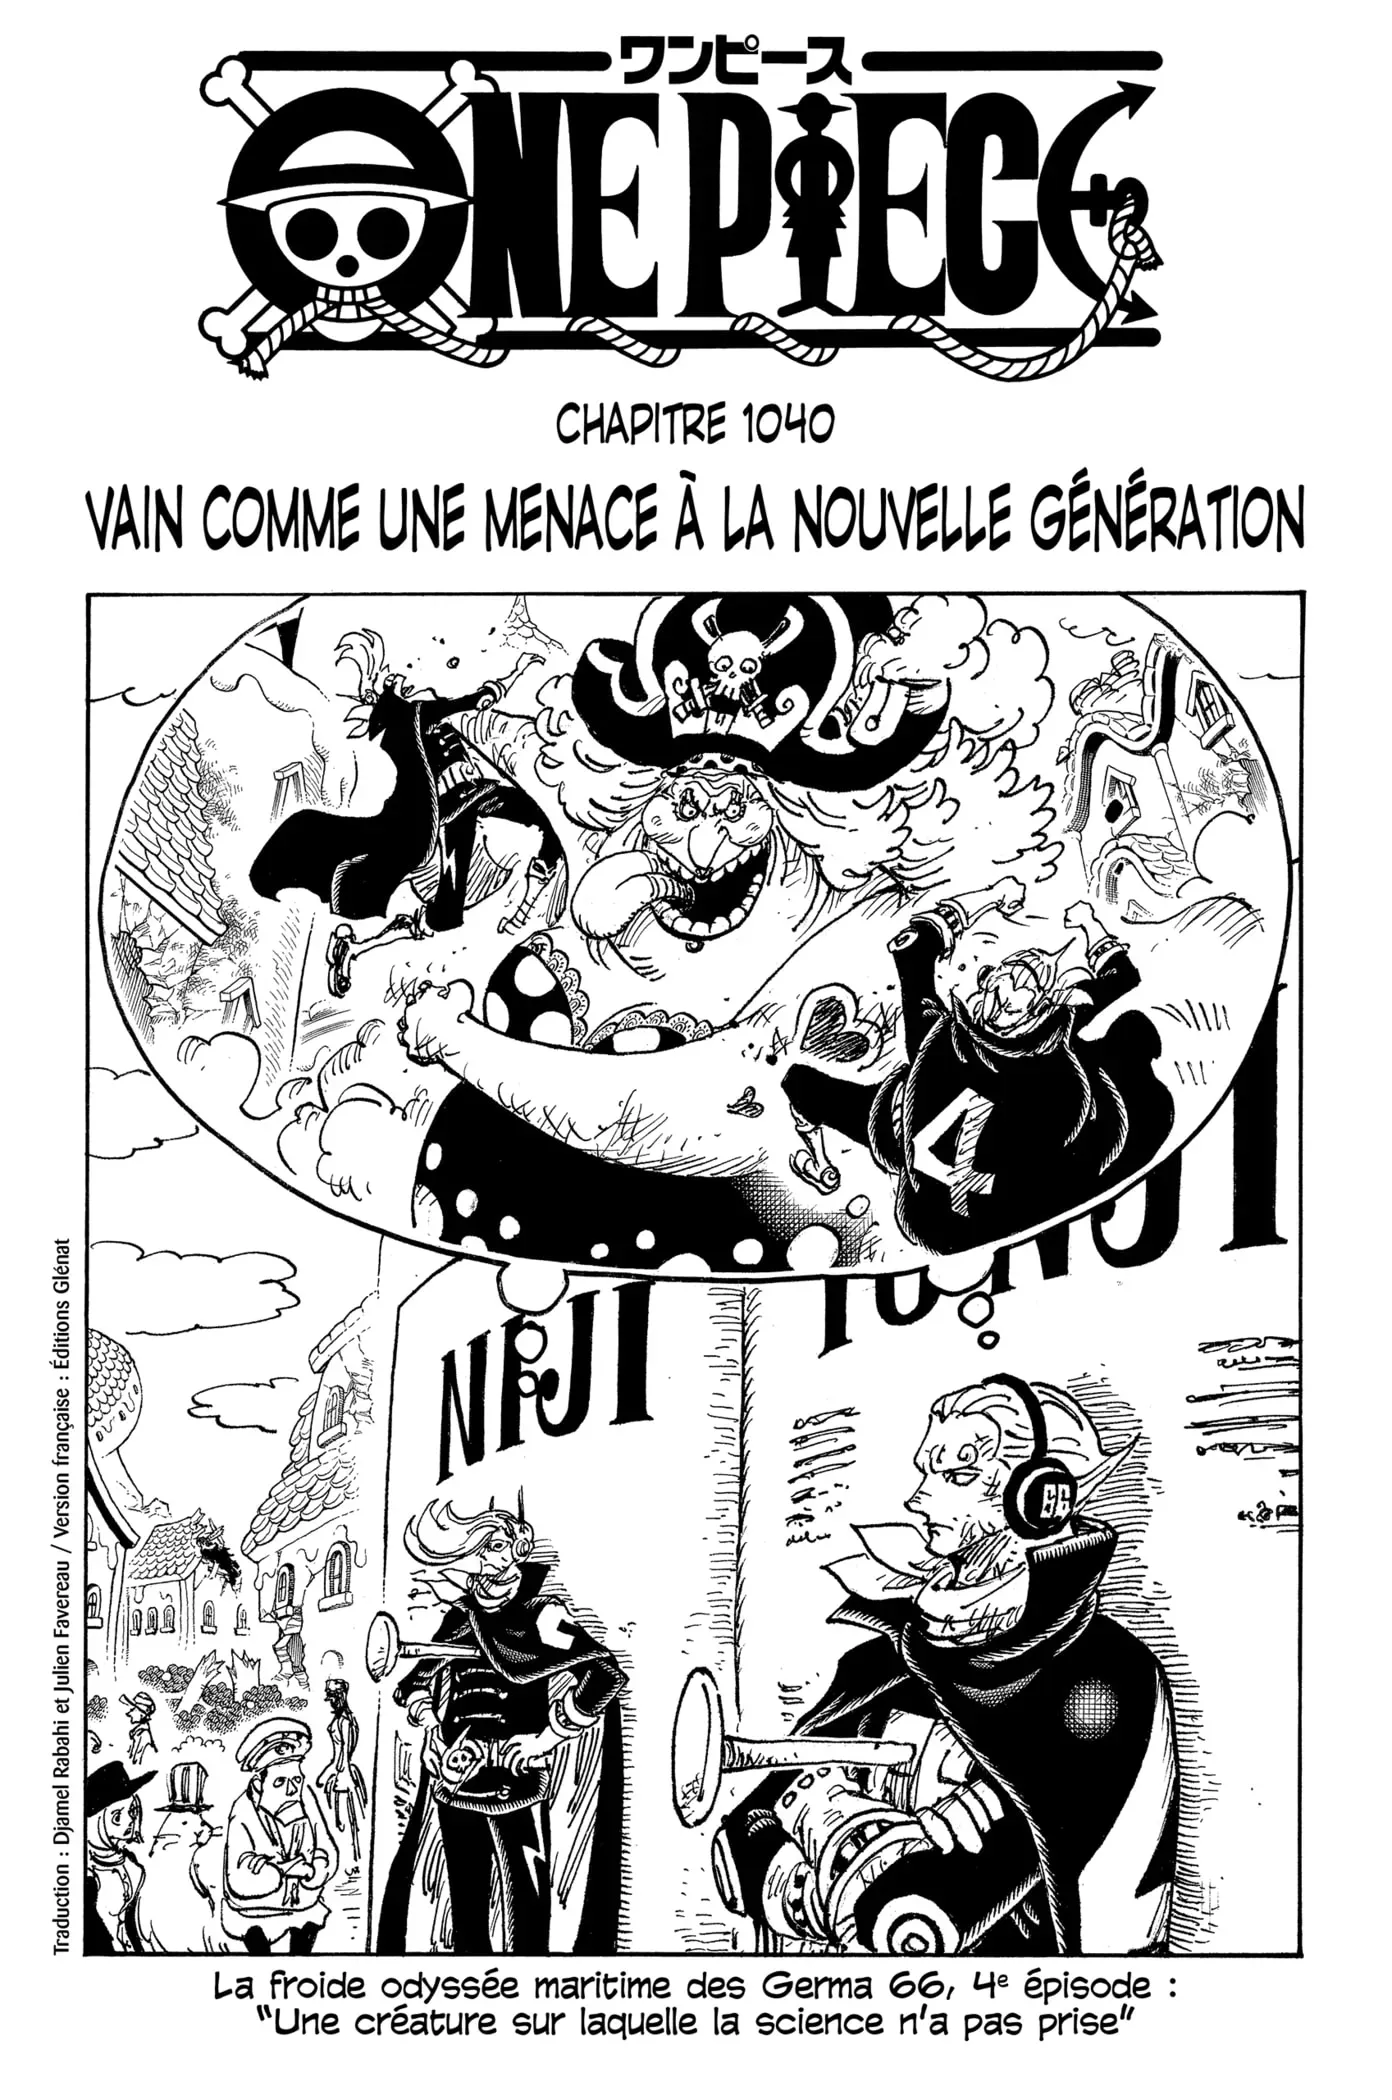 One Piece: Chapter chapitre-1040 - Page 1